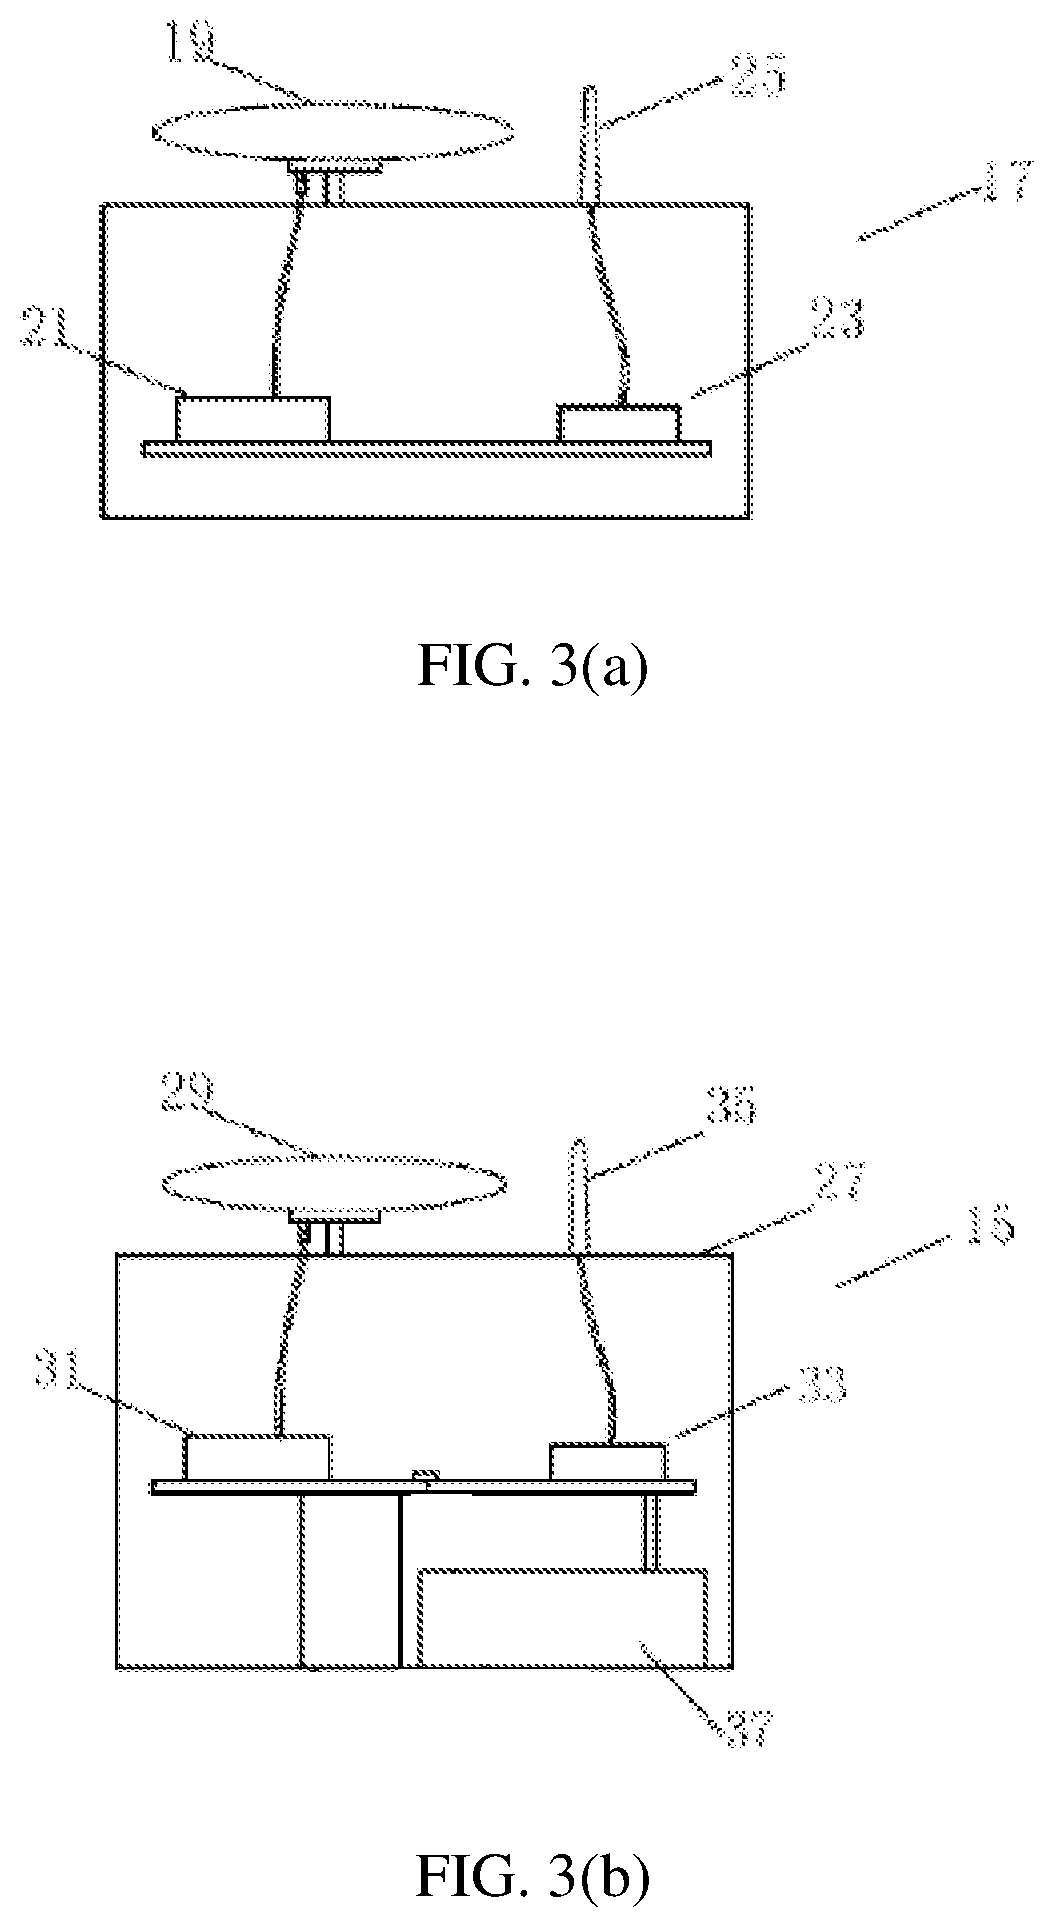 Self-moving device, method for providing alarm about positioning fault in same, self-moving device, and automatic working system